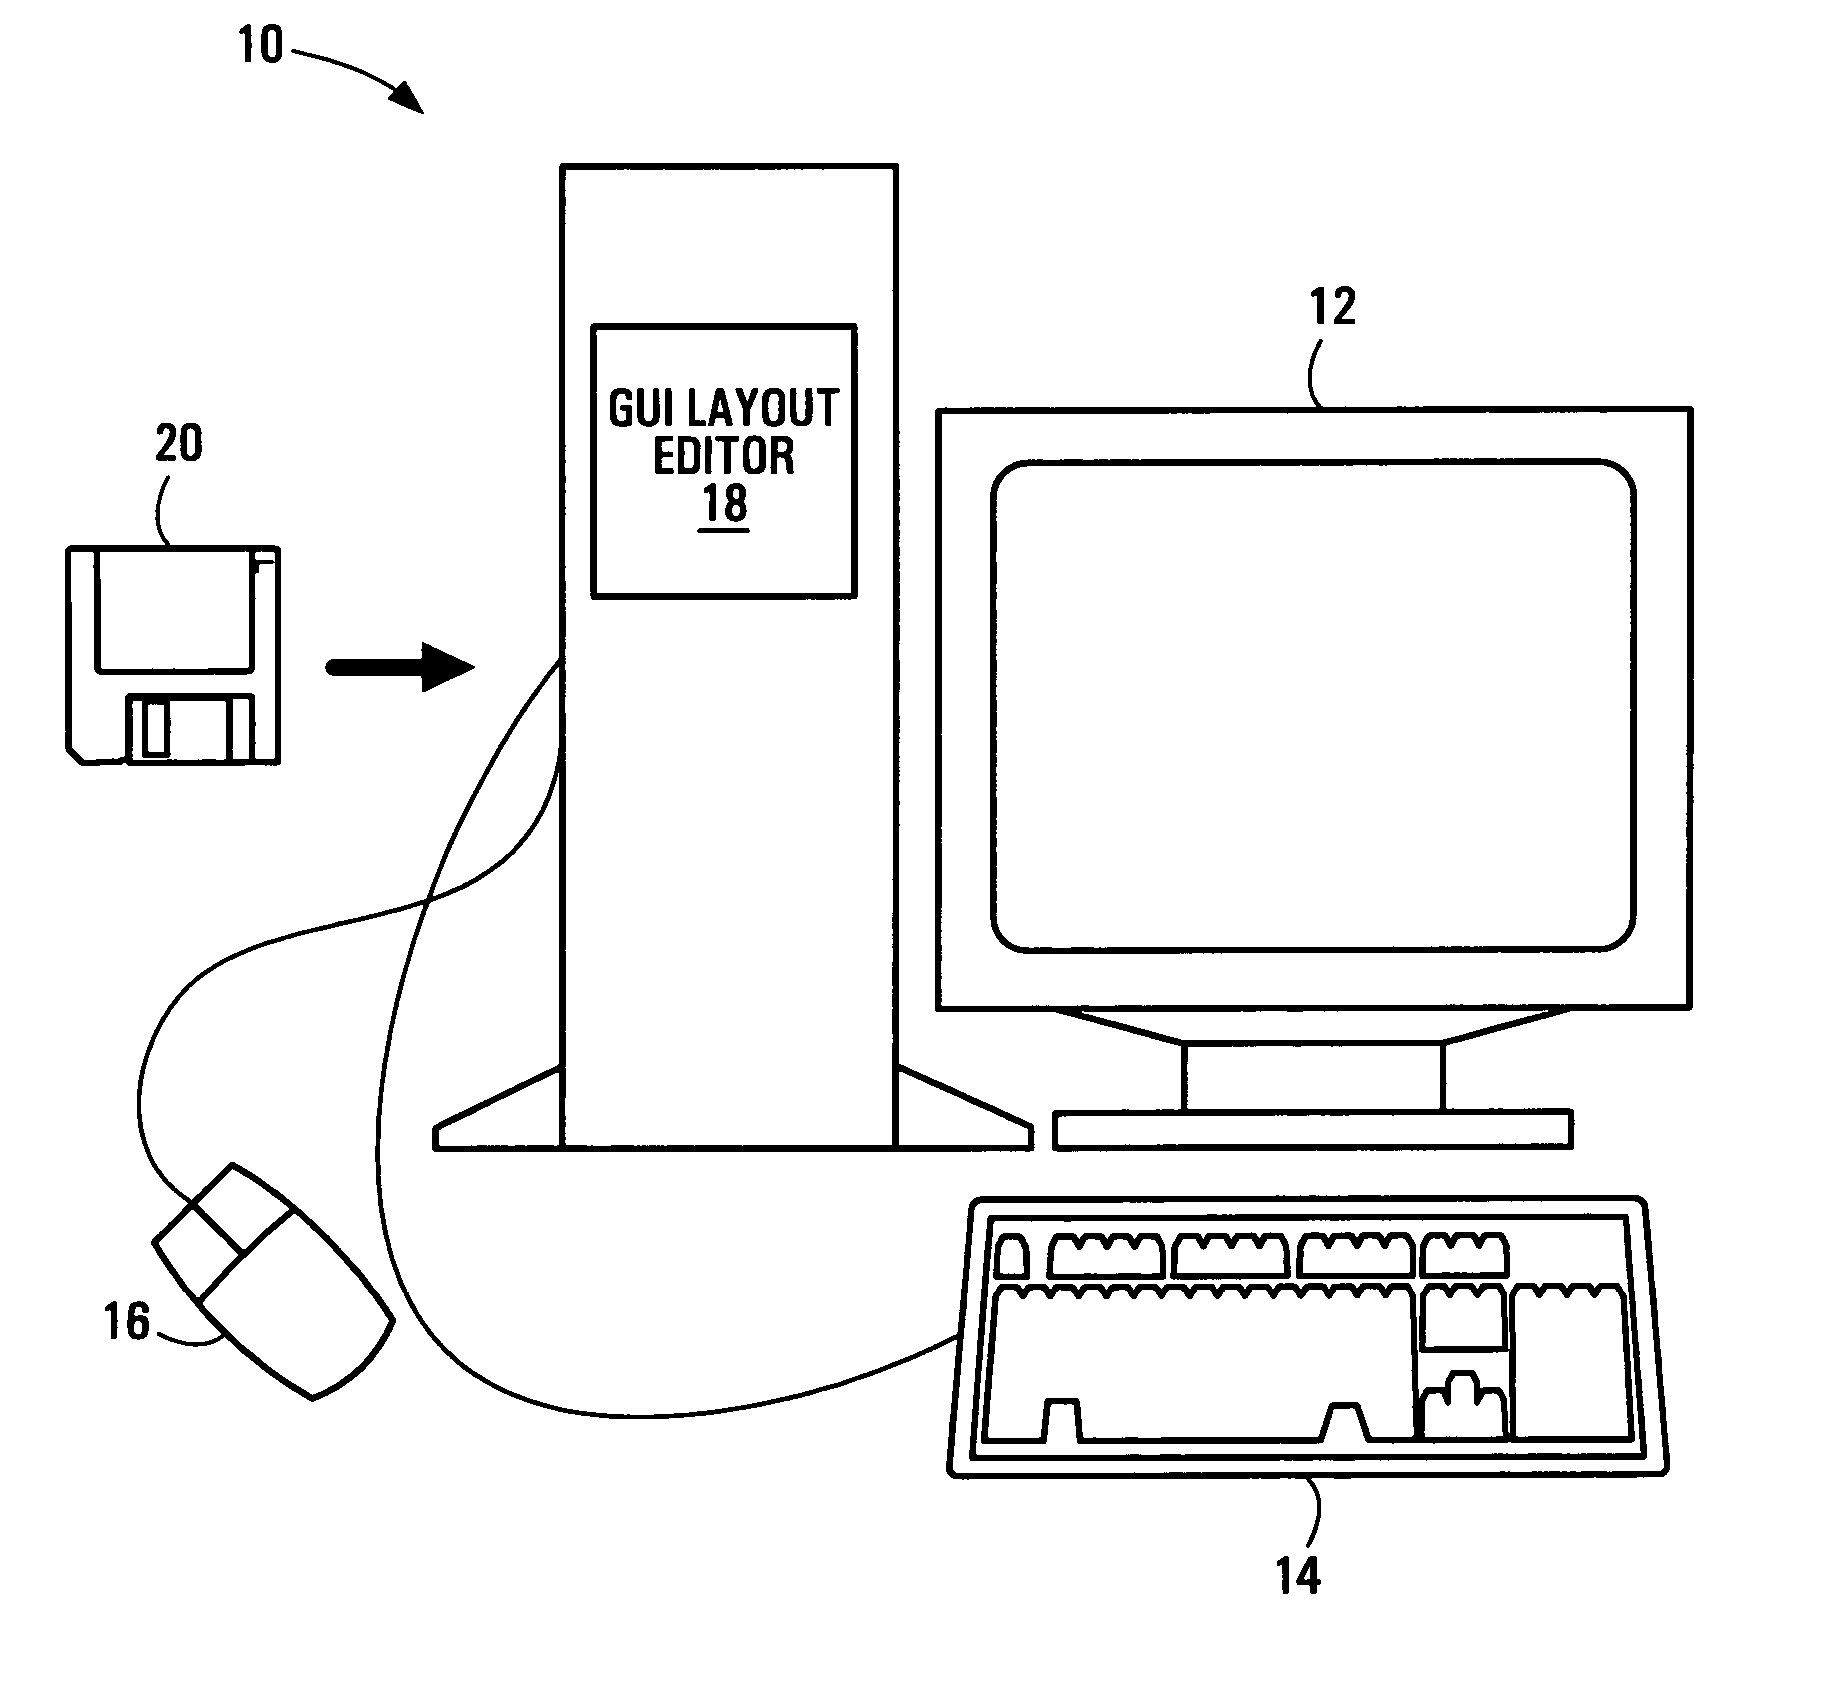 Display of enlarged visual container graphical user interface (GUI) components during GUI layout or design